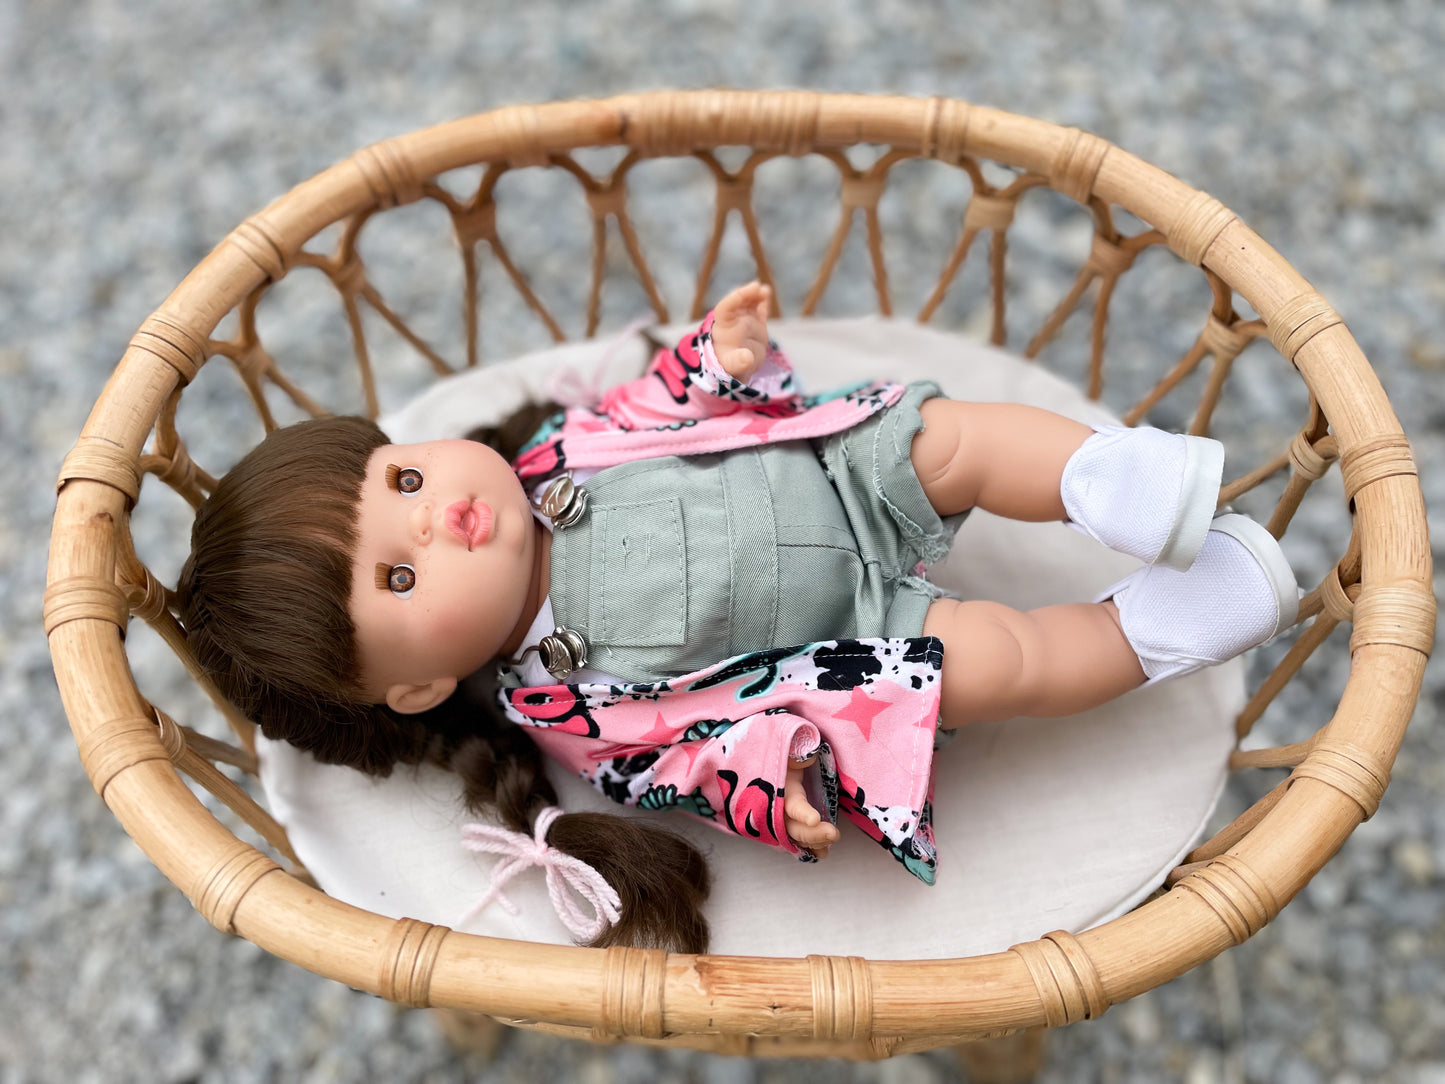 Valentine With Country Girl Outfit -Minikane Girl Doll - OOAK